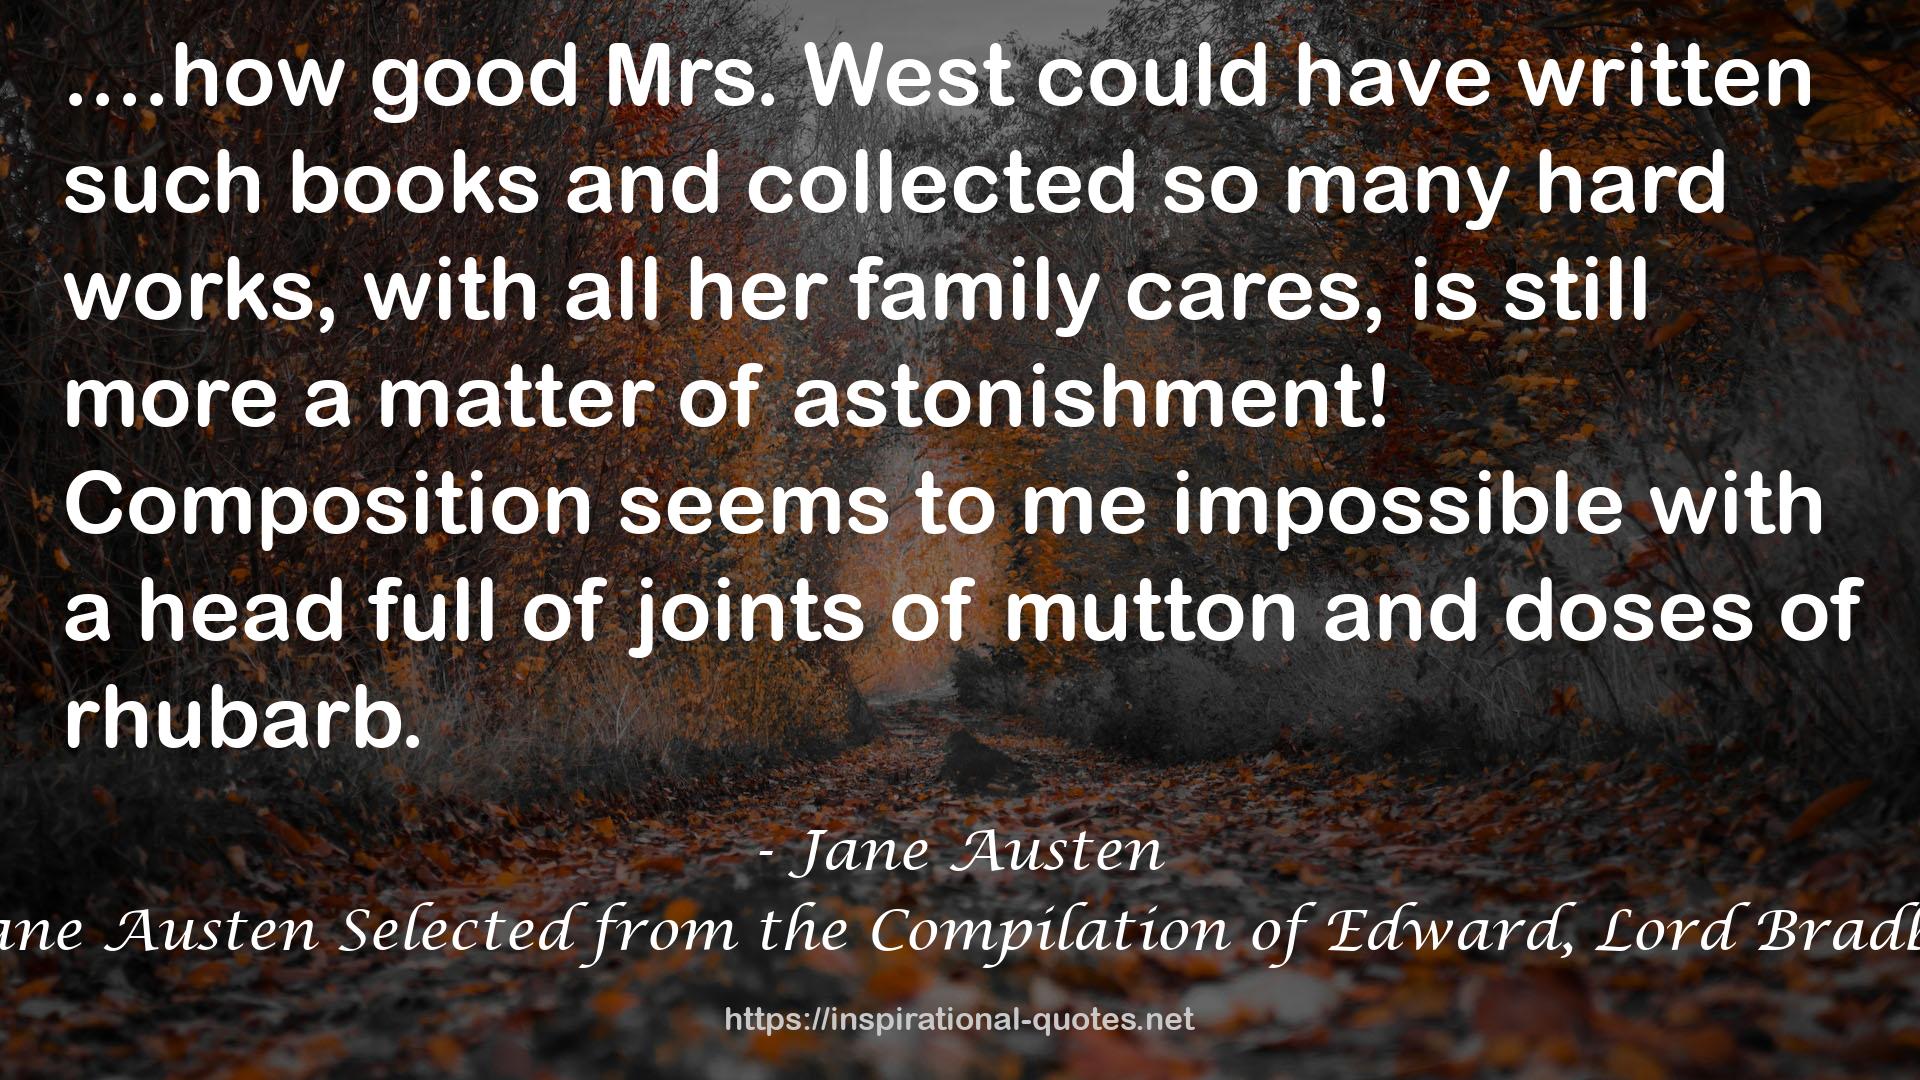 Works (Volume 12); The Letters of Jane Austen Selected from the Compilation of Edward, Lord Bradbourne, by Sarah Chauncey Woolsey QUOTES